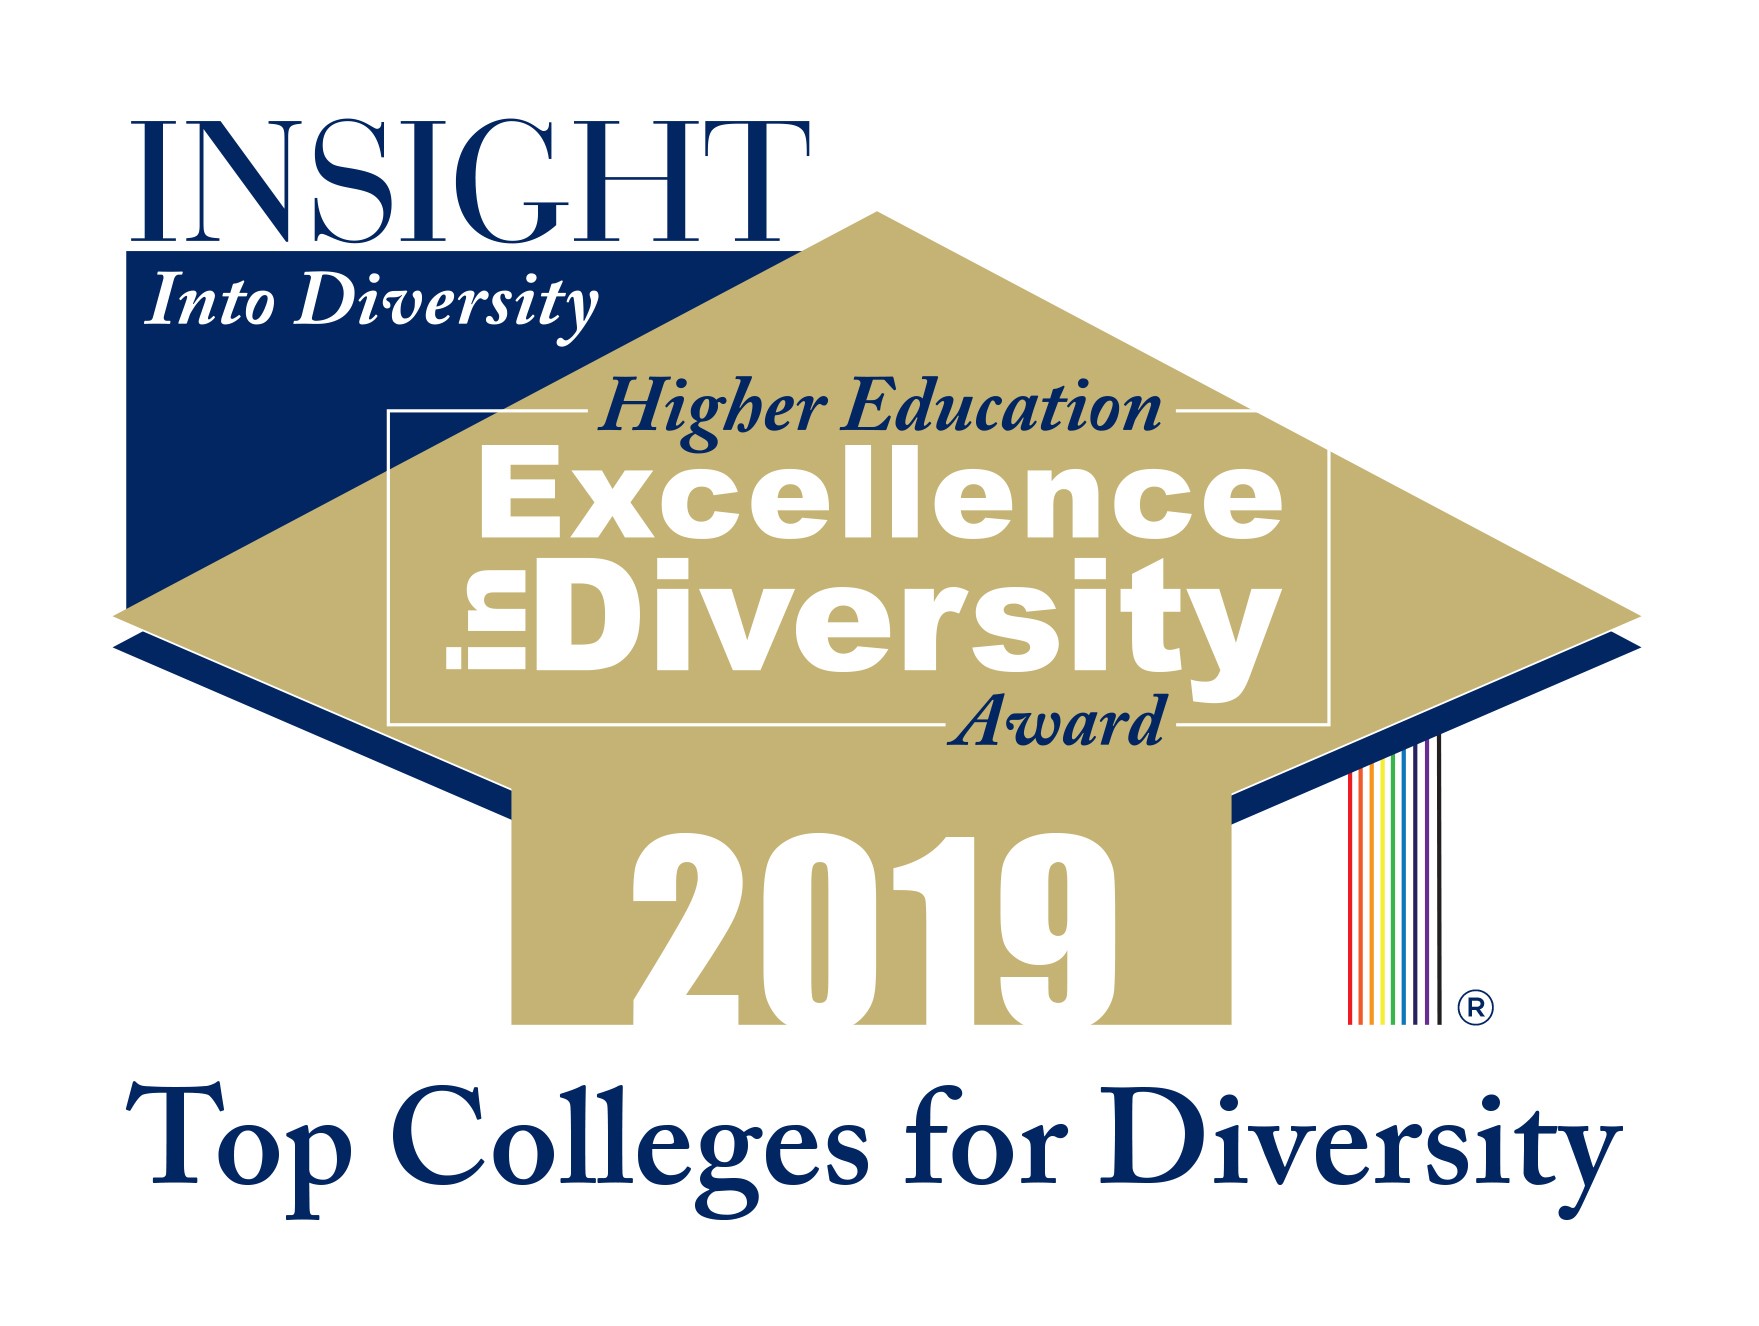 Top colleges for diversity badge 2019